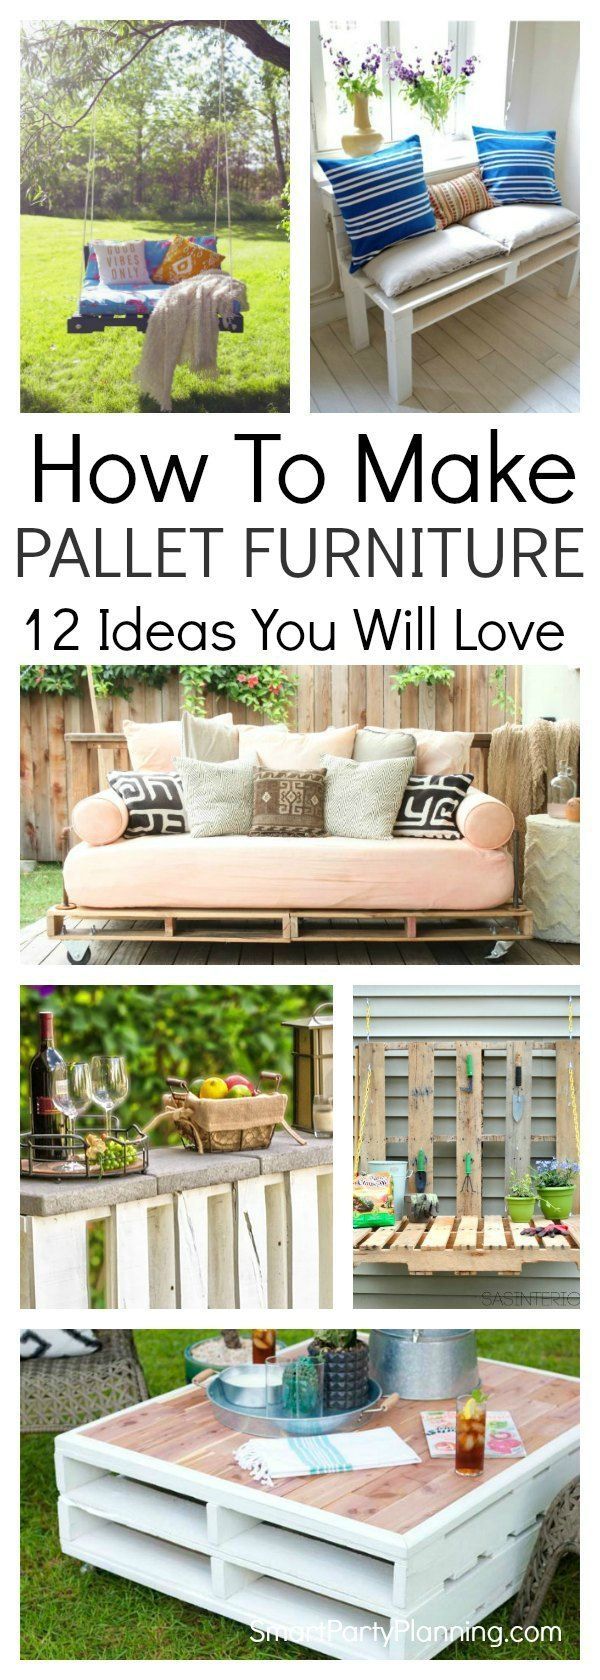 How To Make Pallet Furniture. 12 Ideas You Will Love -   17 diy projects for the home backyards ideas